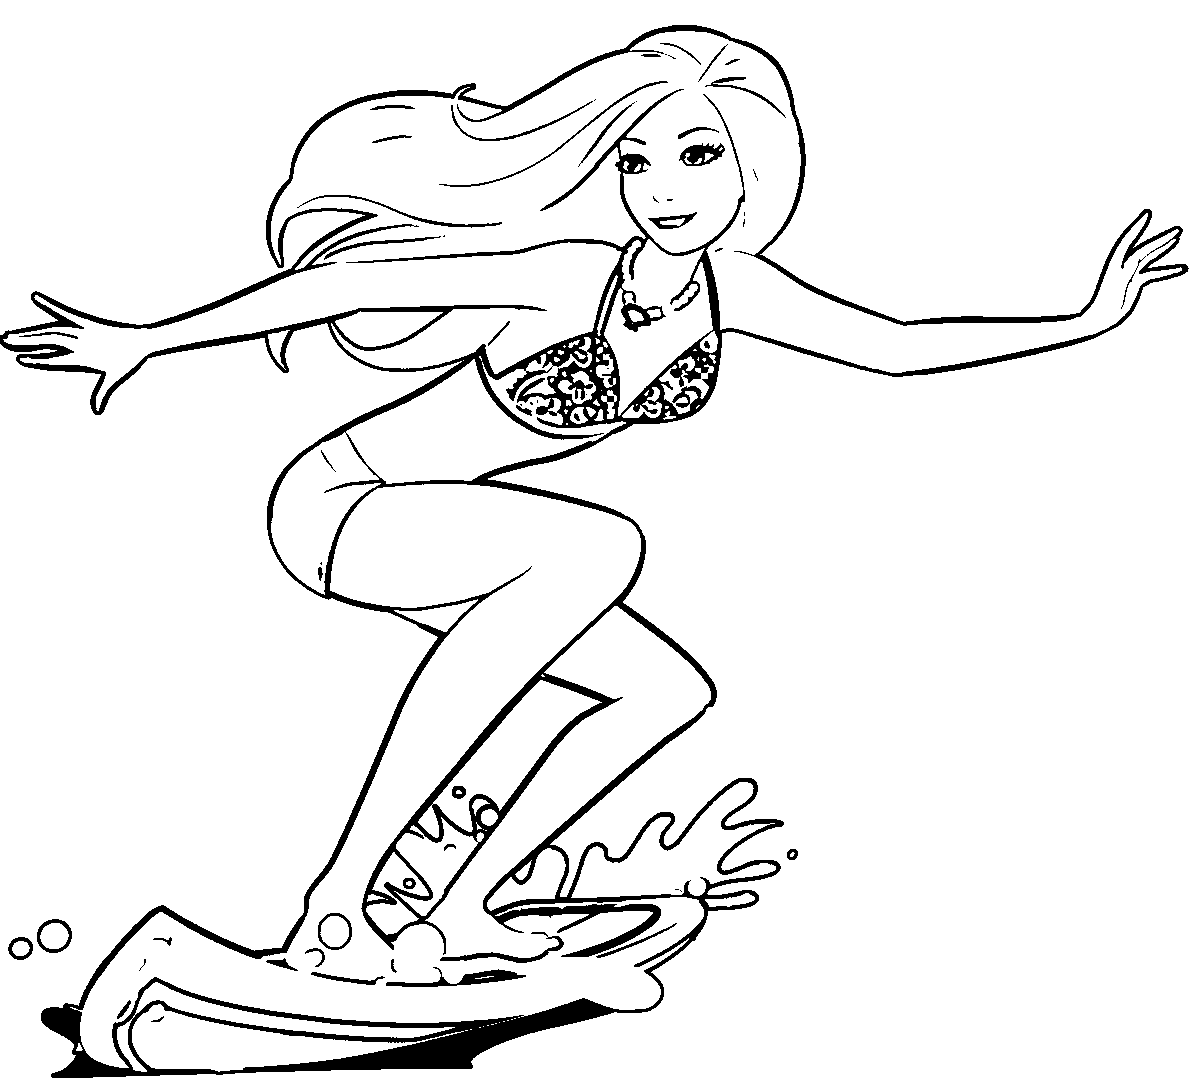 Free Surf Coloring Pages Black And White, Download Free Clip Art, Free Clip  Art on Clipart Library